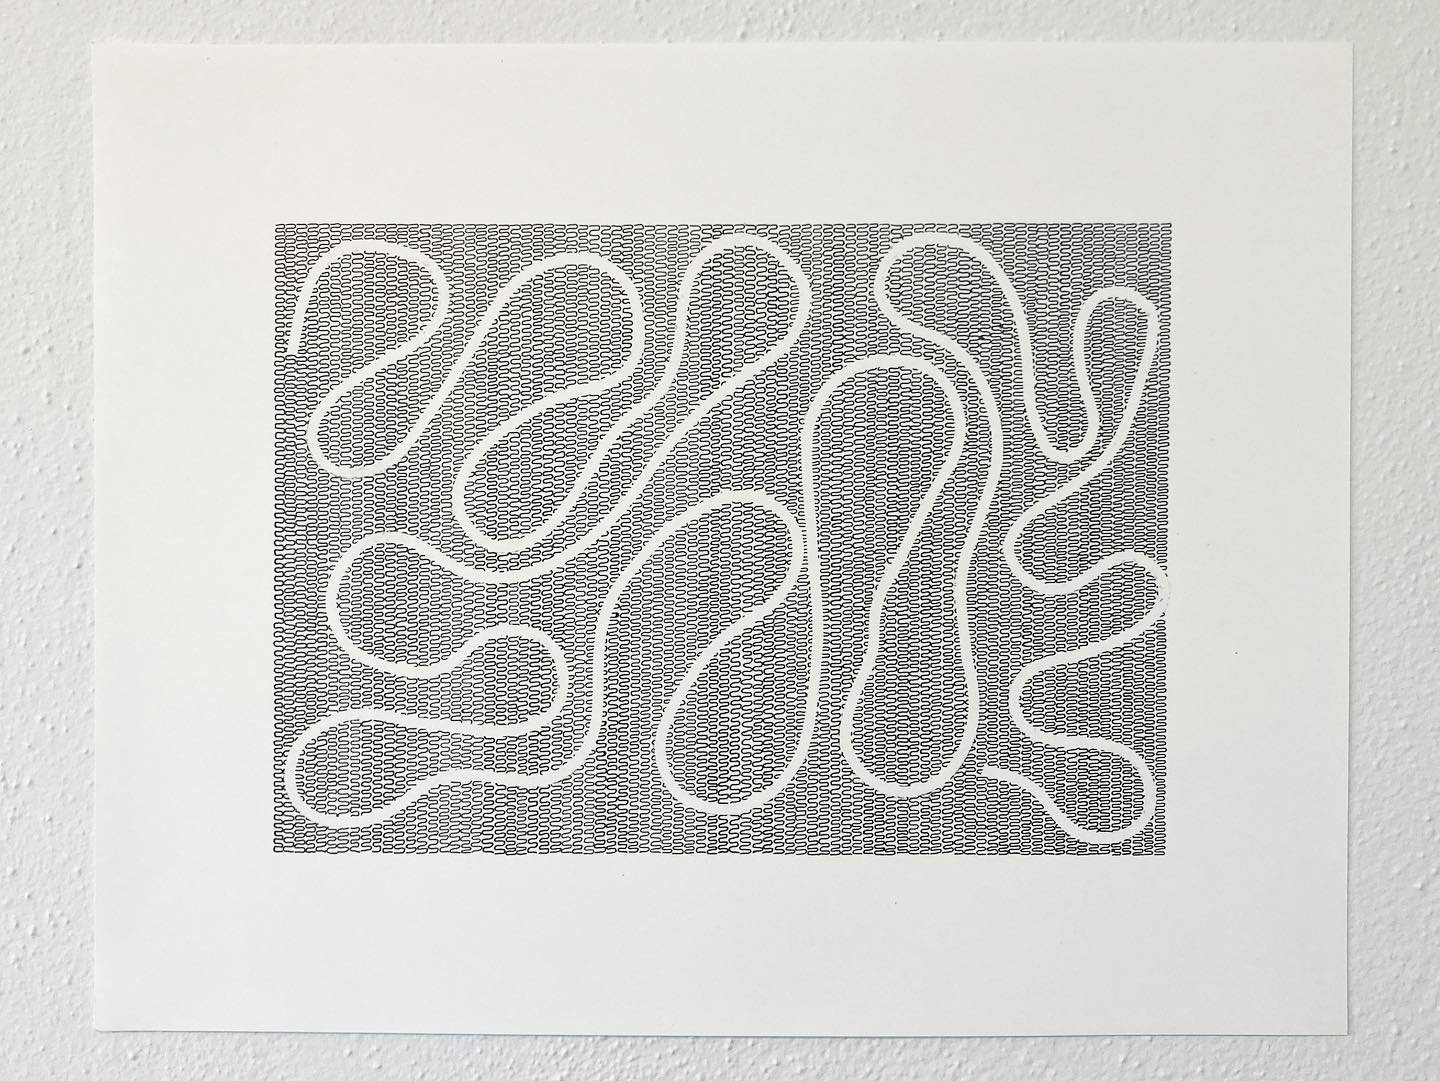 got up at the crack of dawn the other day and finally found the time to finish this squiggly baby 〰️
14x11&rdquo;, India ink on Strathmore 500 bristol, as of yet unnamed 
.
.
.
#drawing #inkonpaper #worksonpaper #art #artist #artistsoninstagram #cont